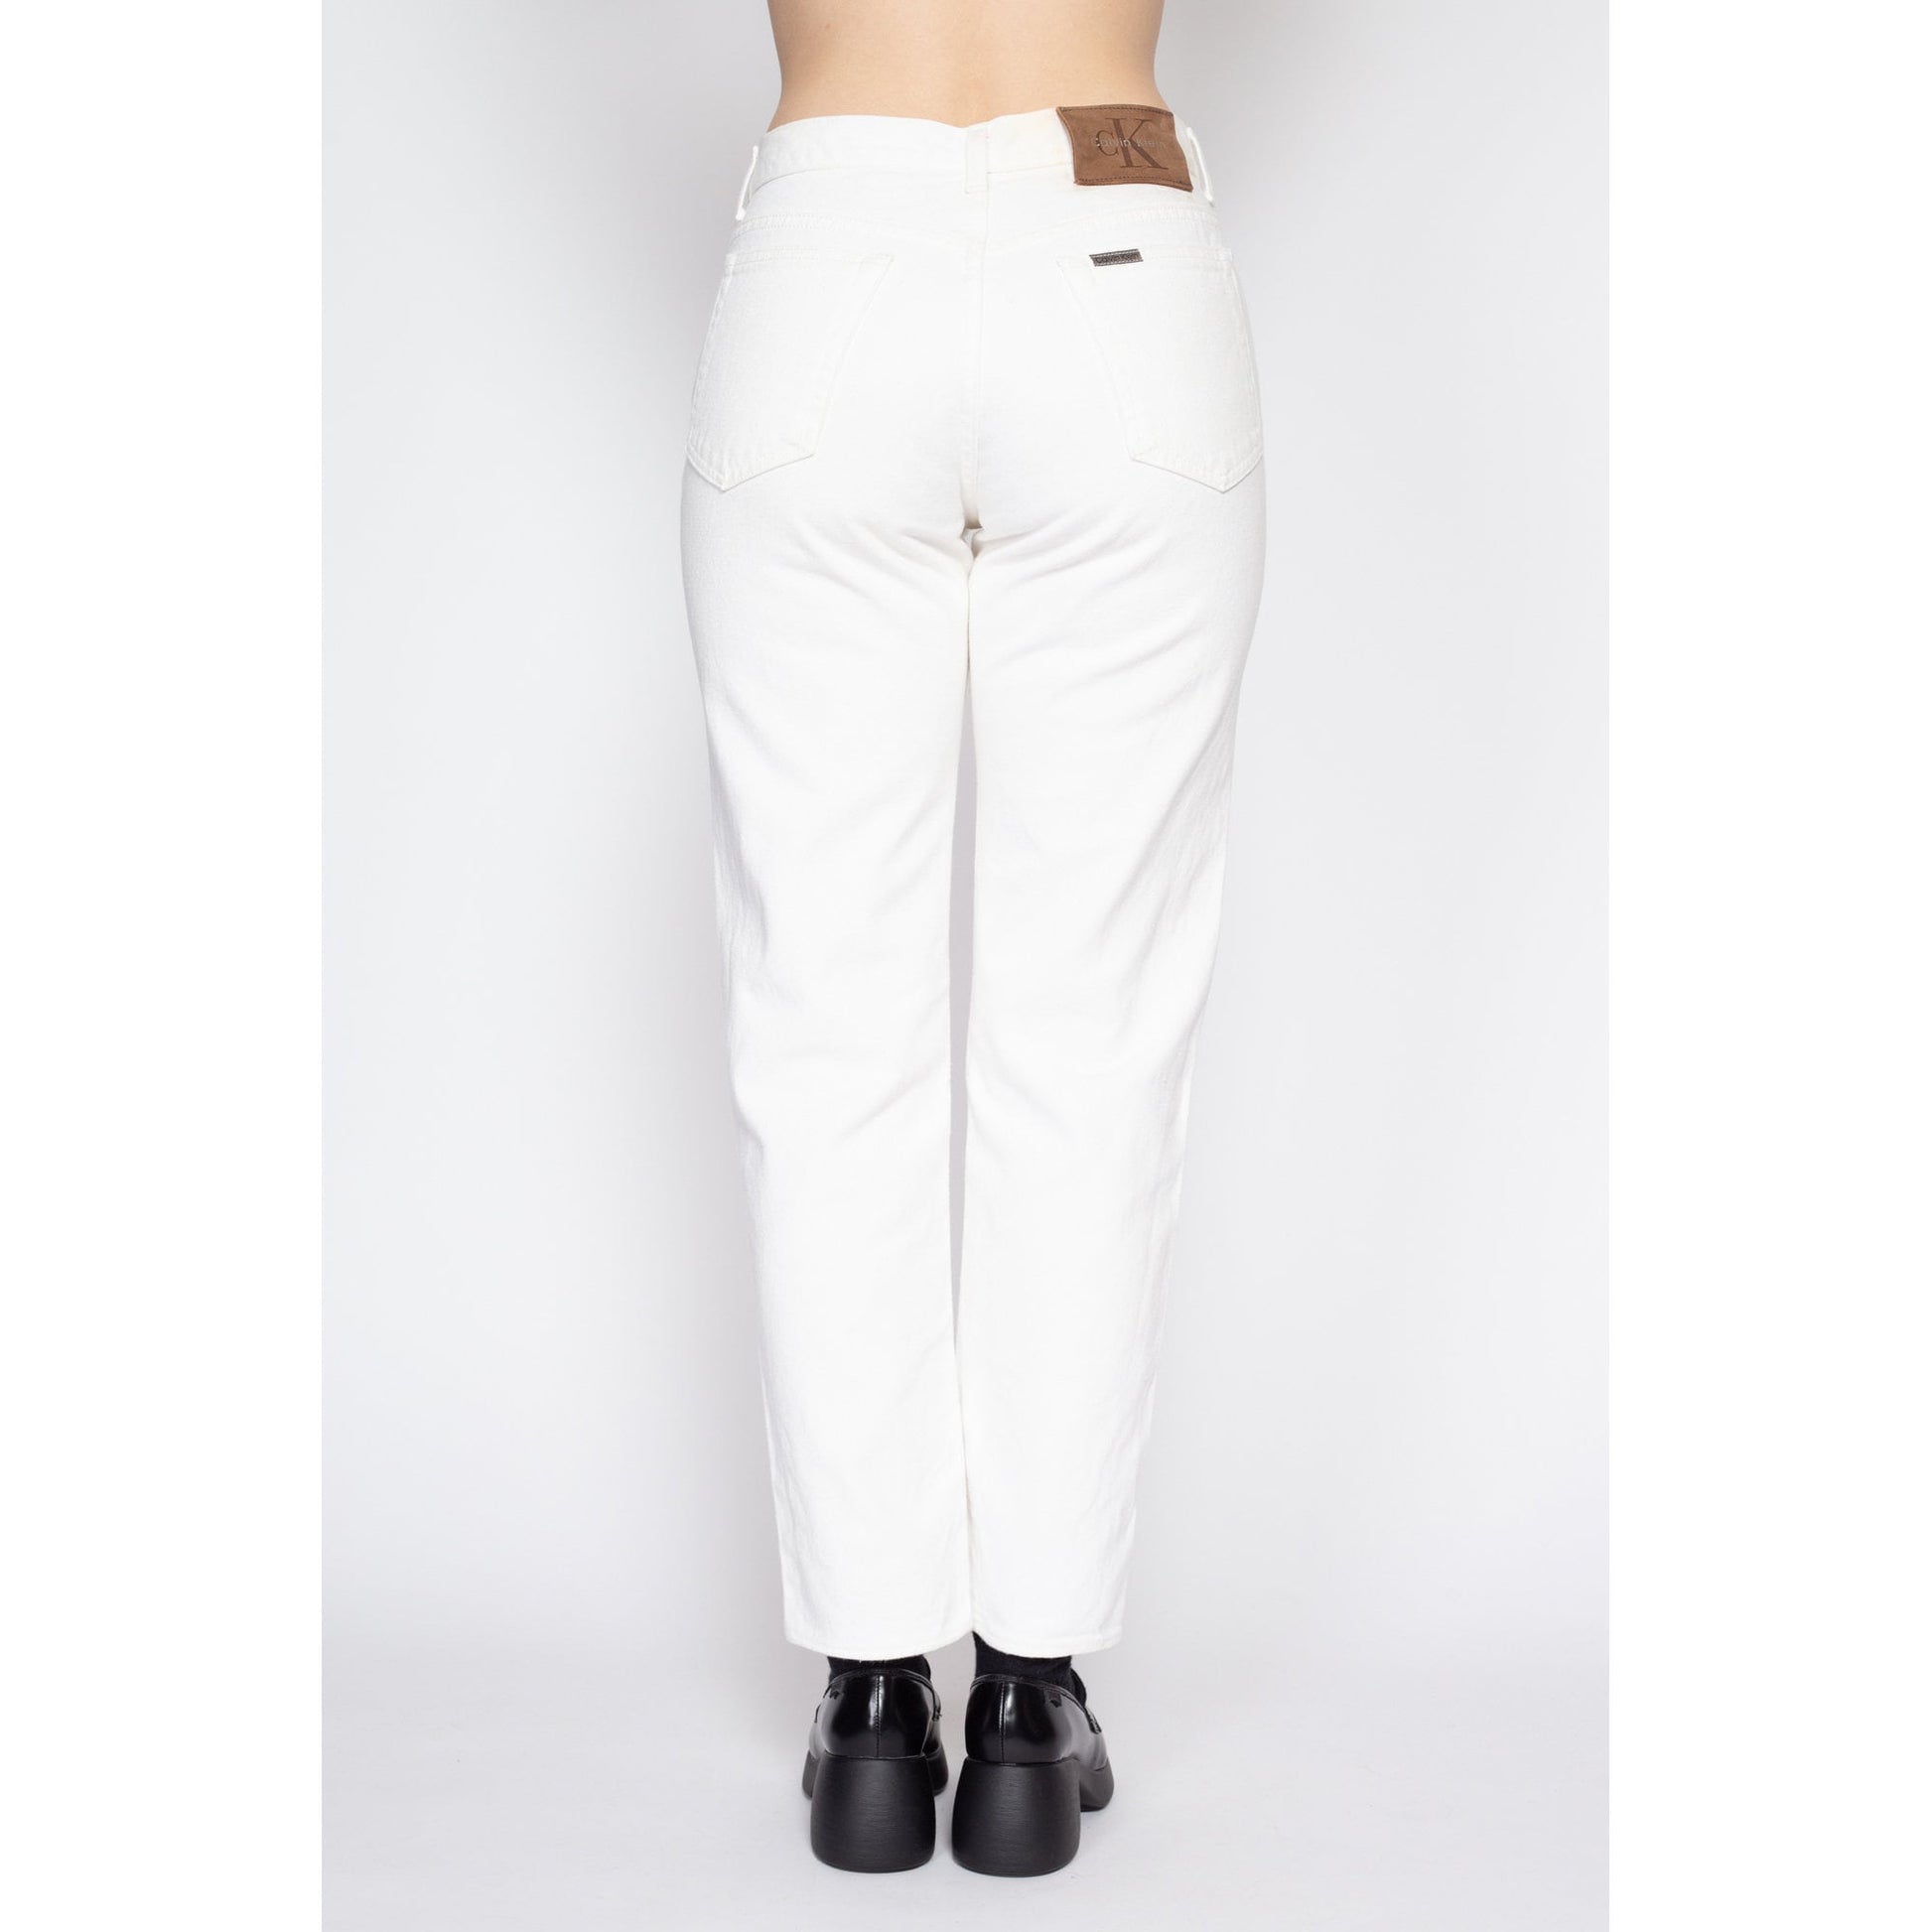 Bottom Wear Plain Ladies Cotton Straight Pants at Rs 290/piece in